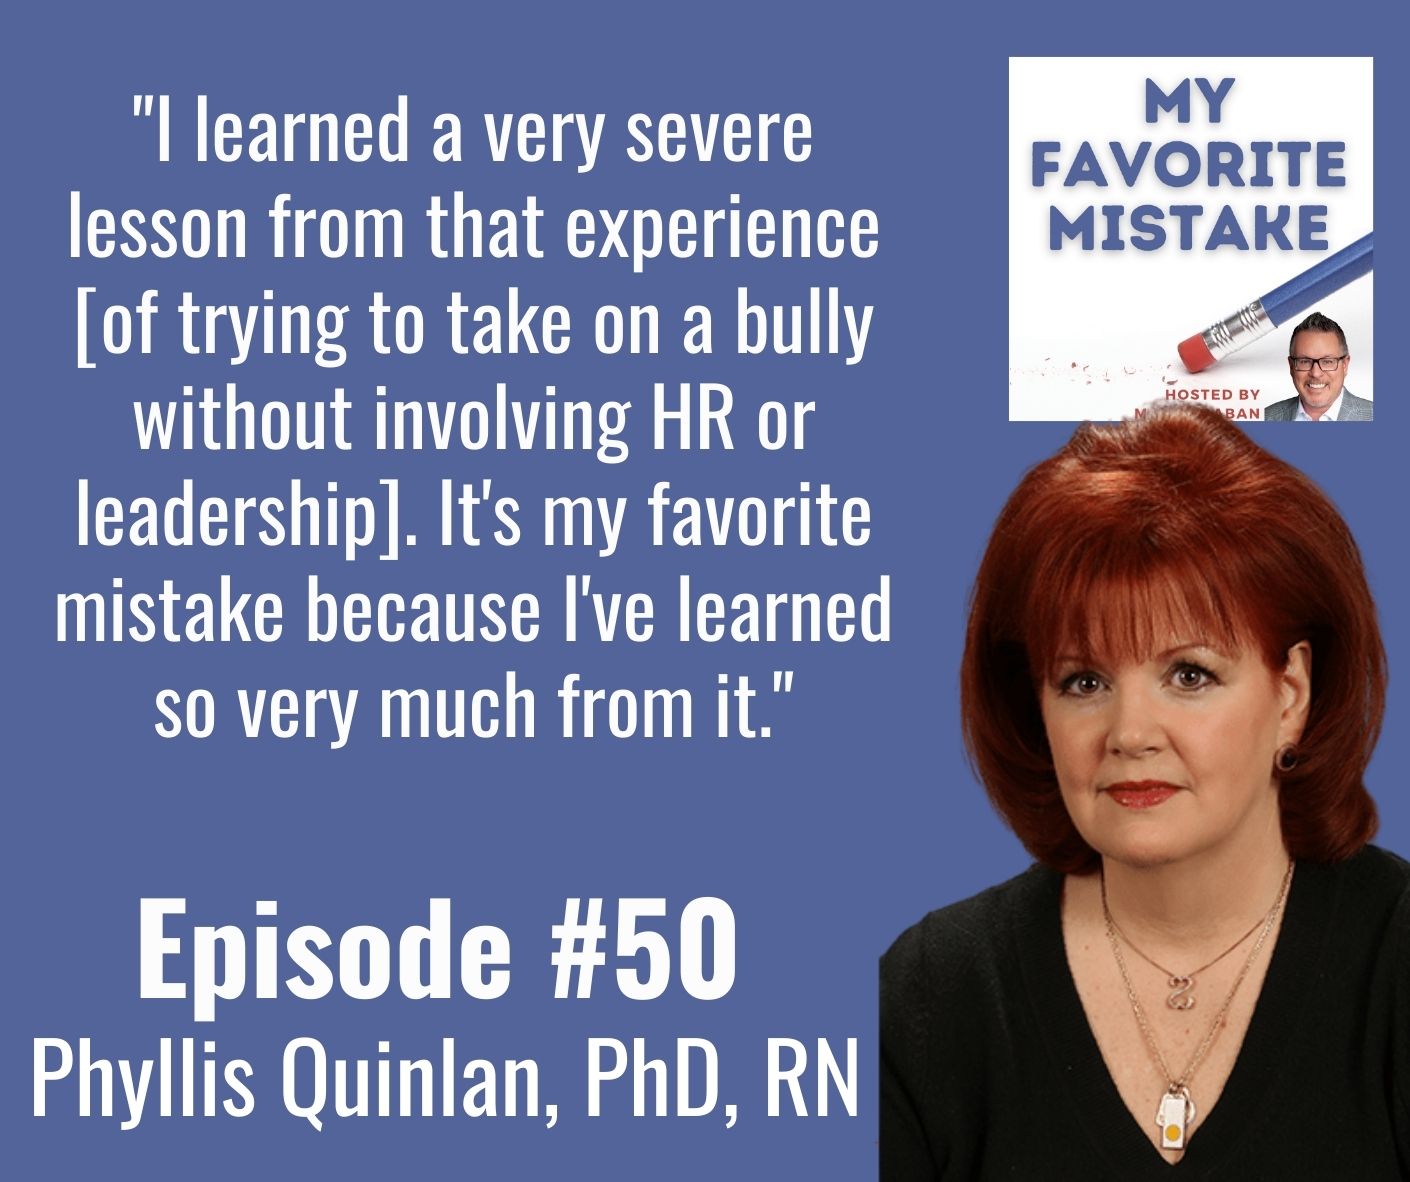 "I learned a very severe lesson from that experience [of trying to take on a bully without involving HR or leadership]. It's my favorite mistake because I've learned so very much from it."